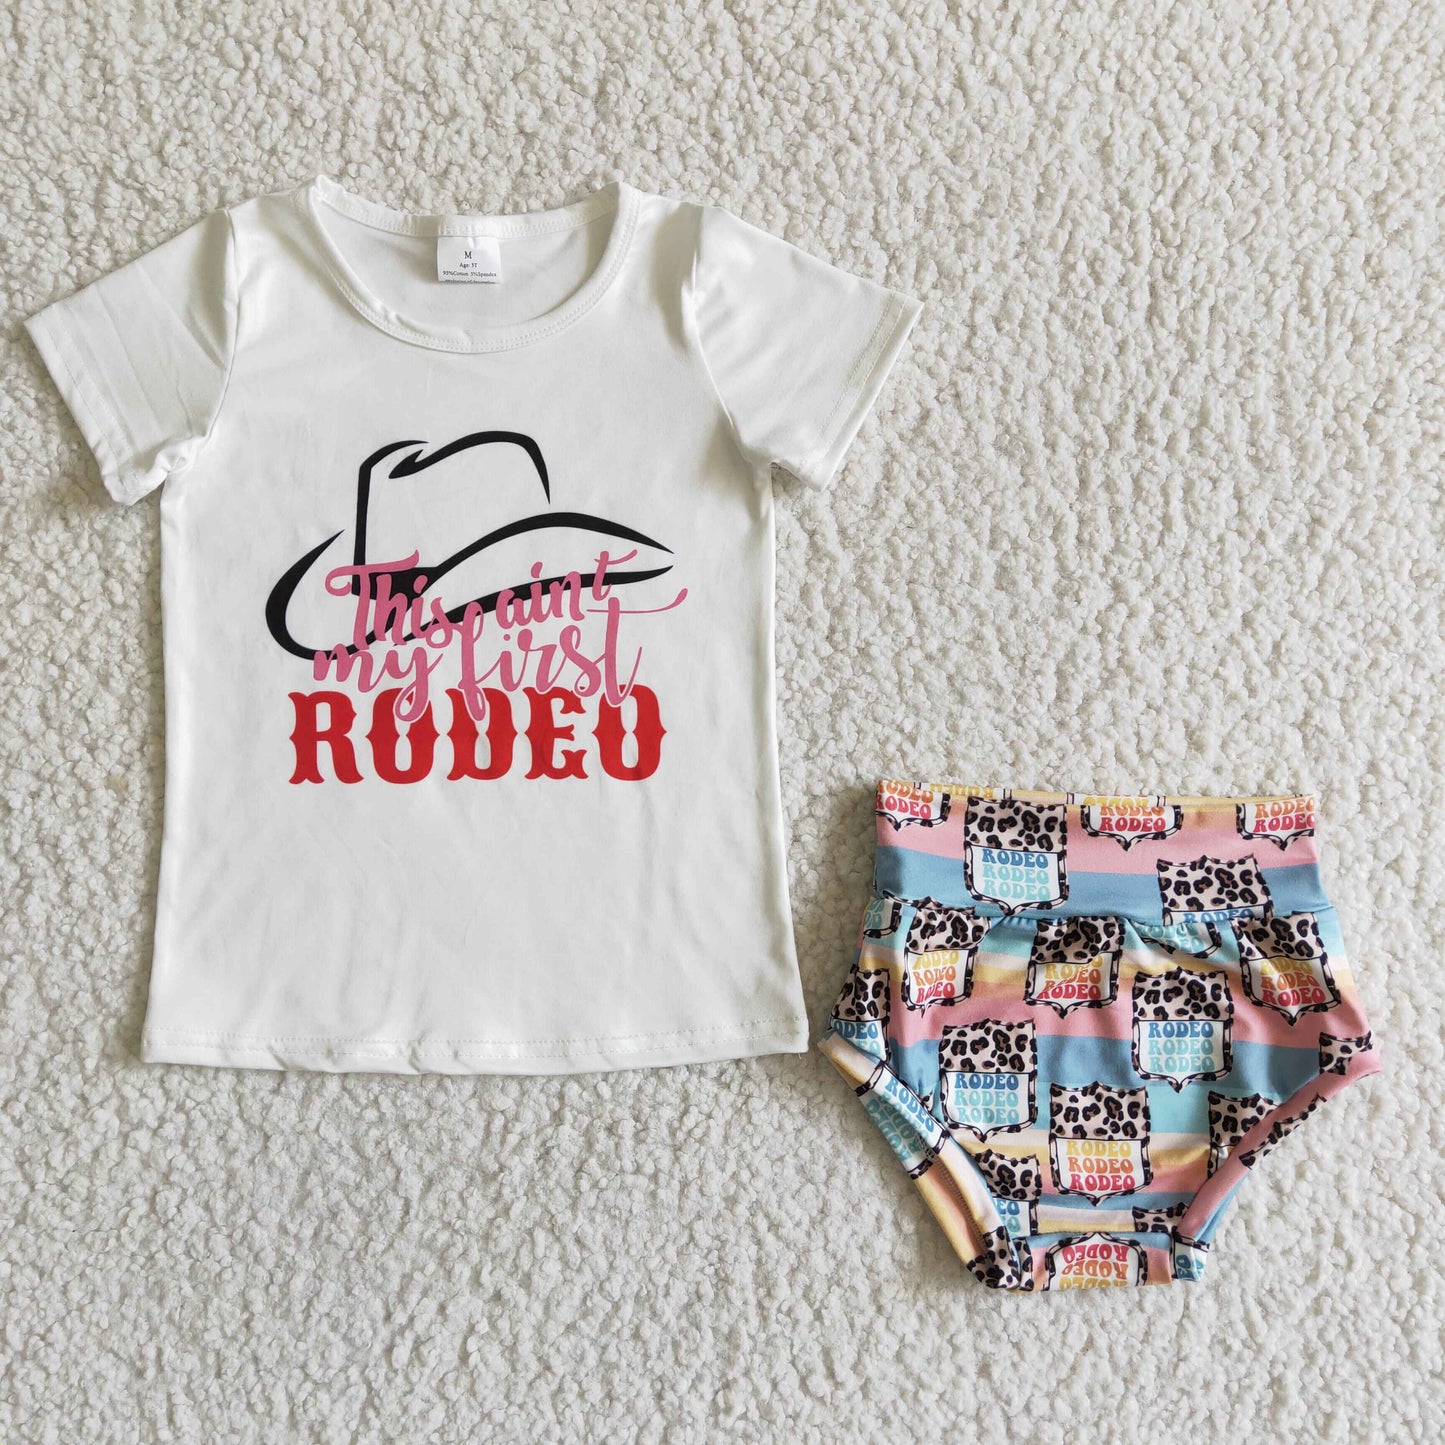 Infant rodeo bloomer bummie set outfit clothing